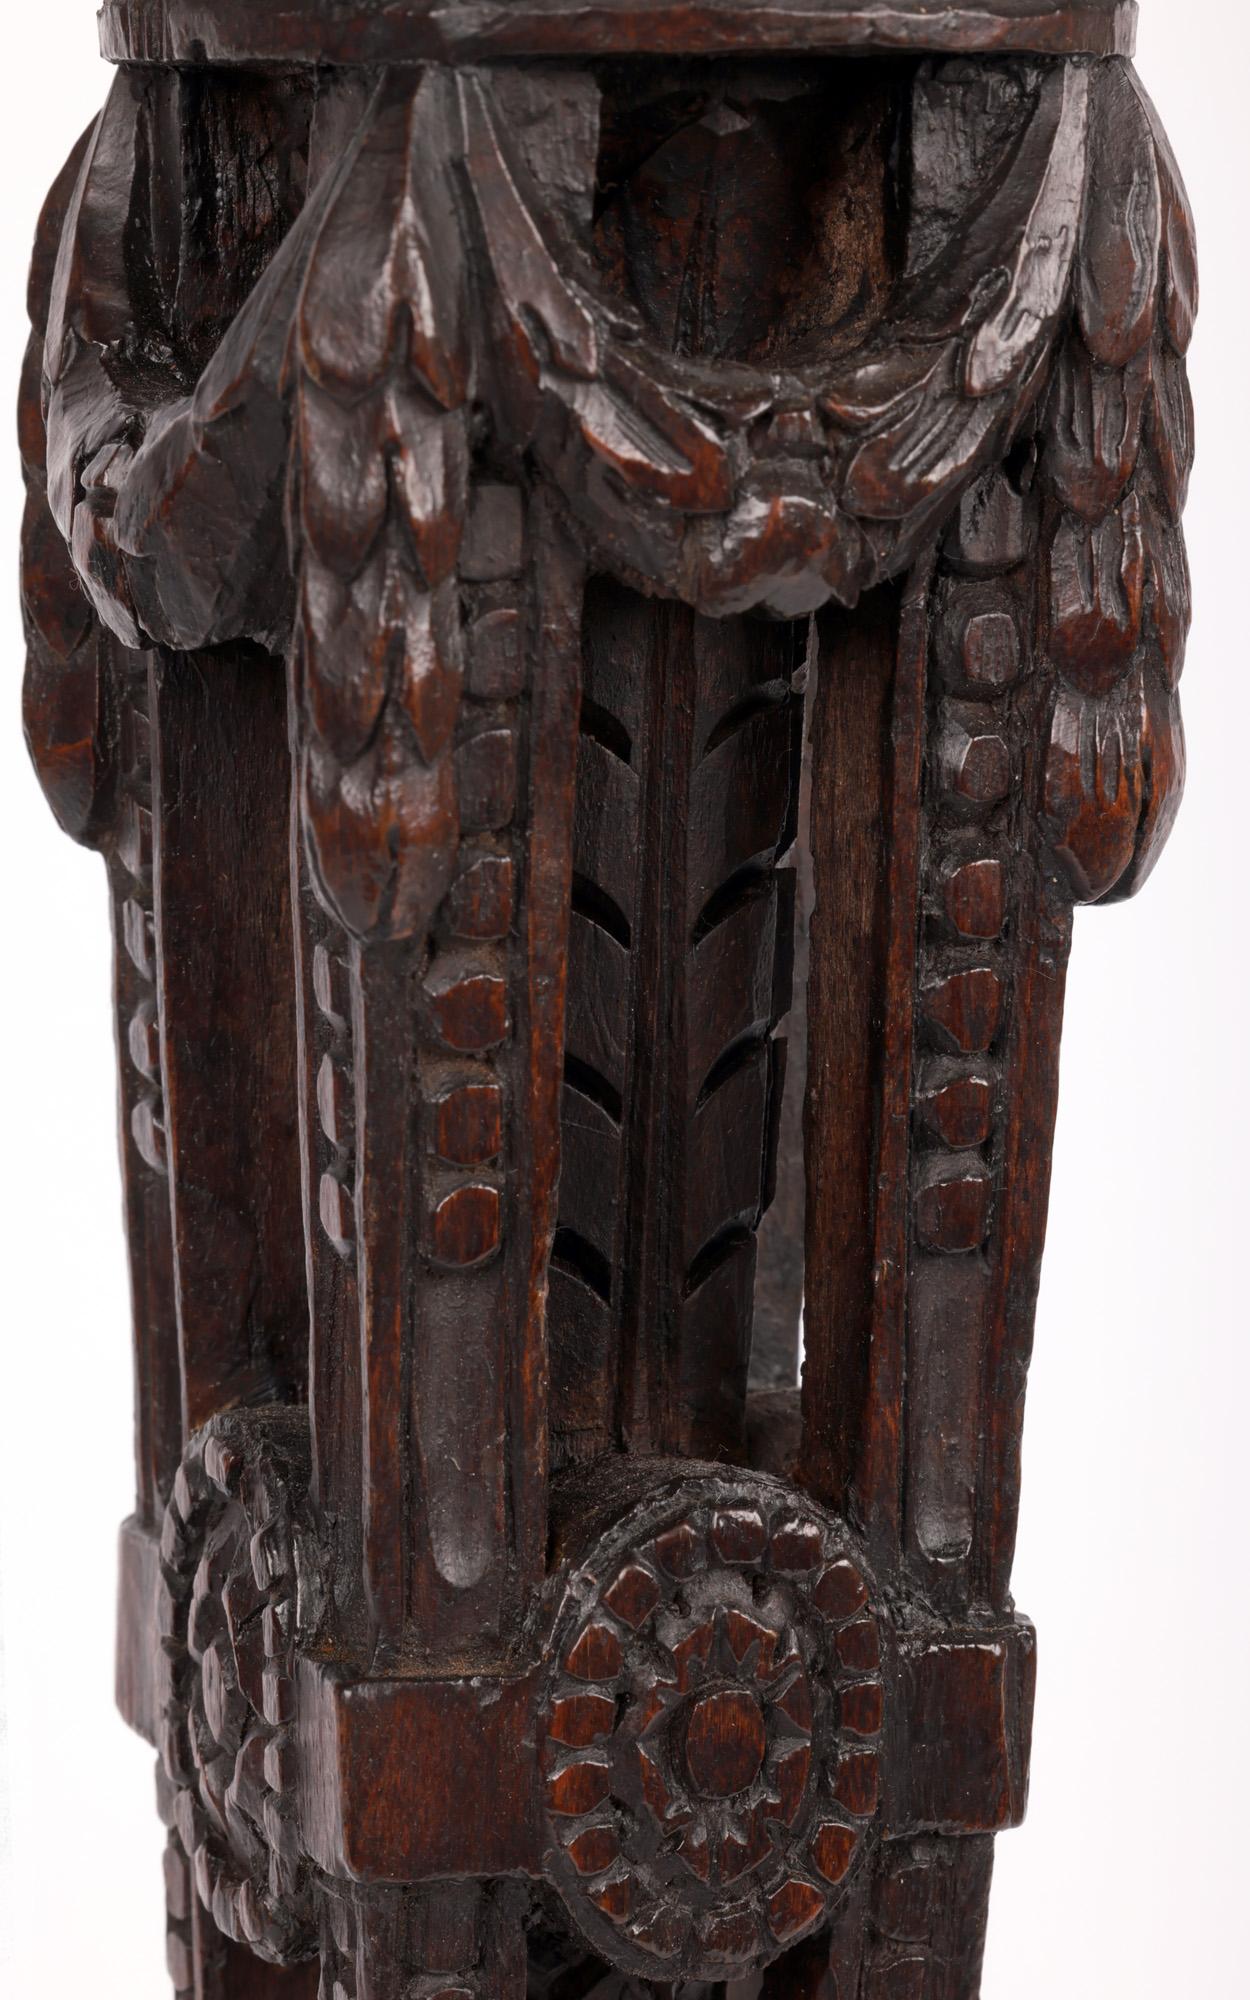 Flemish Carved Pricket Candlestick with Putti Late 16th or Early 17th Century For Sale 7